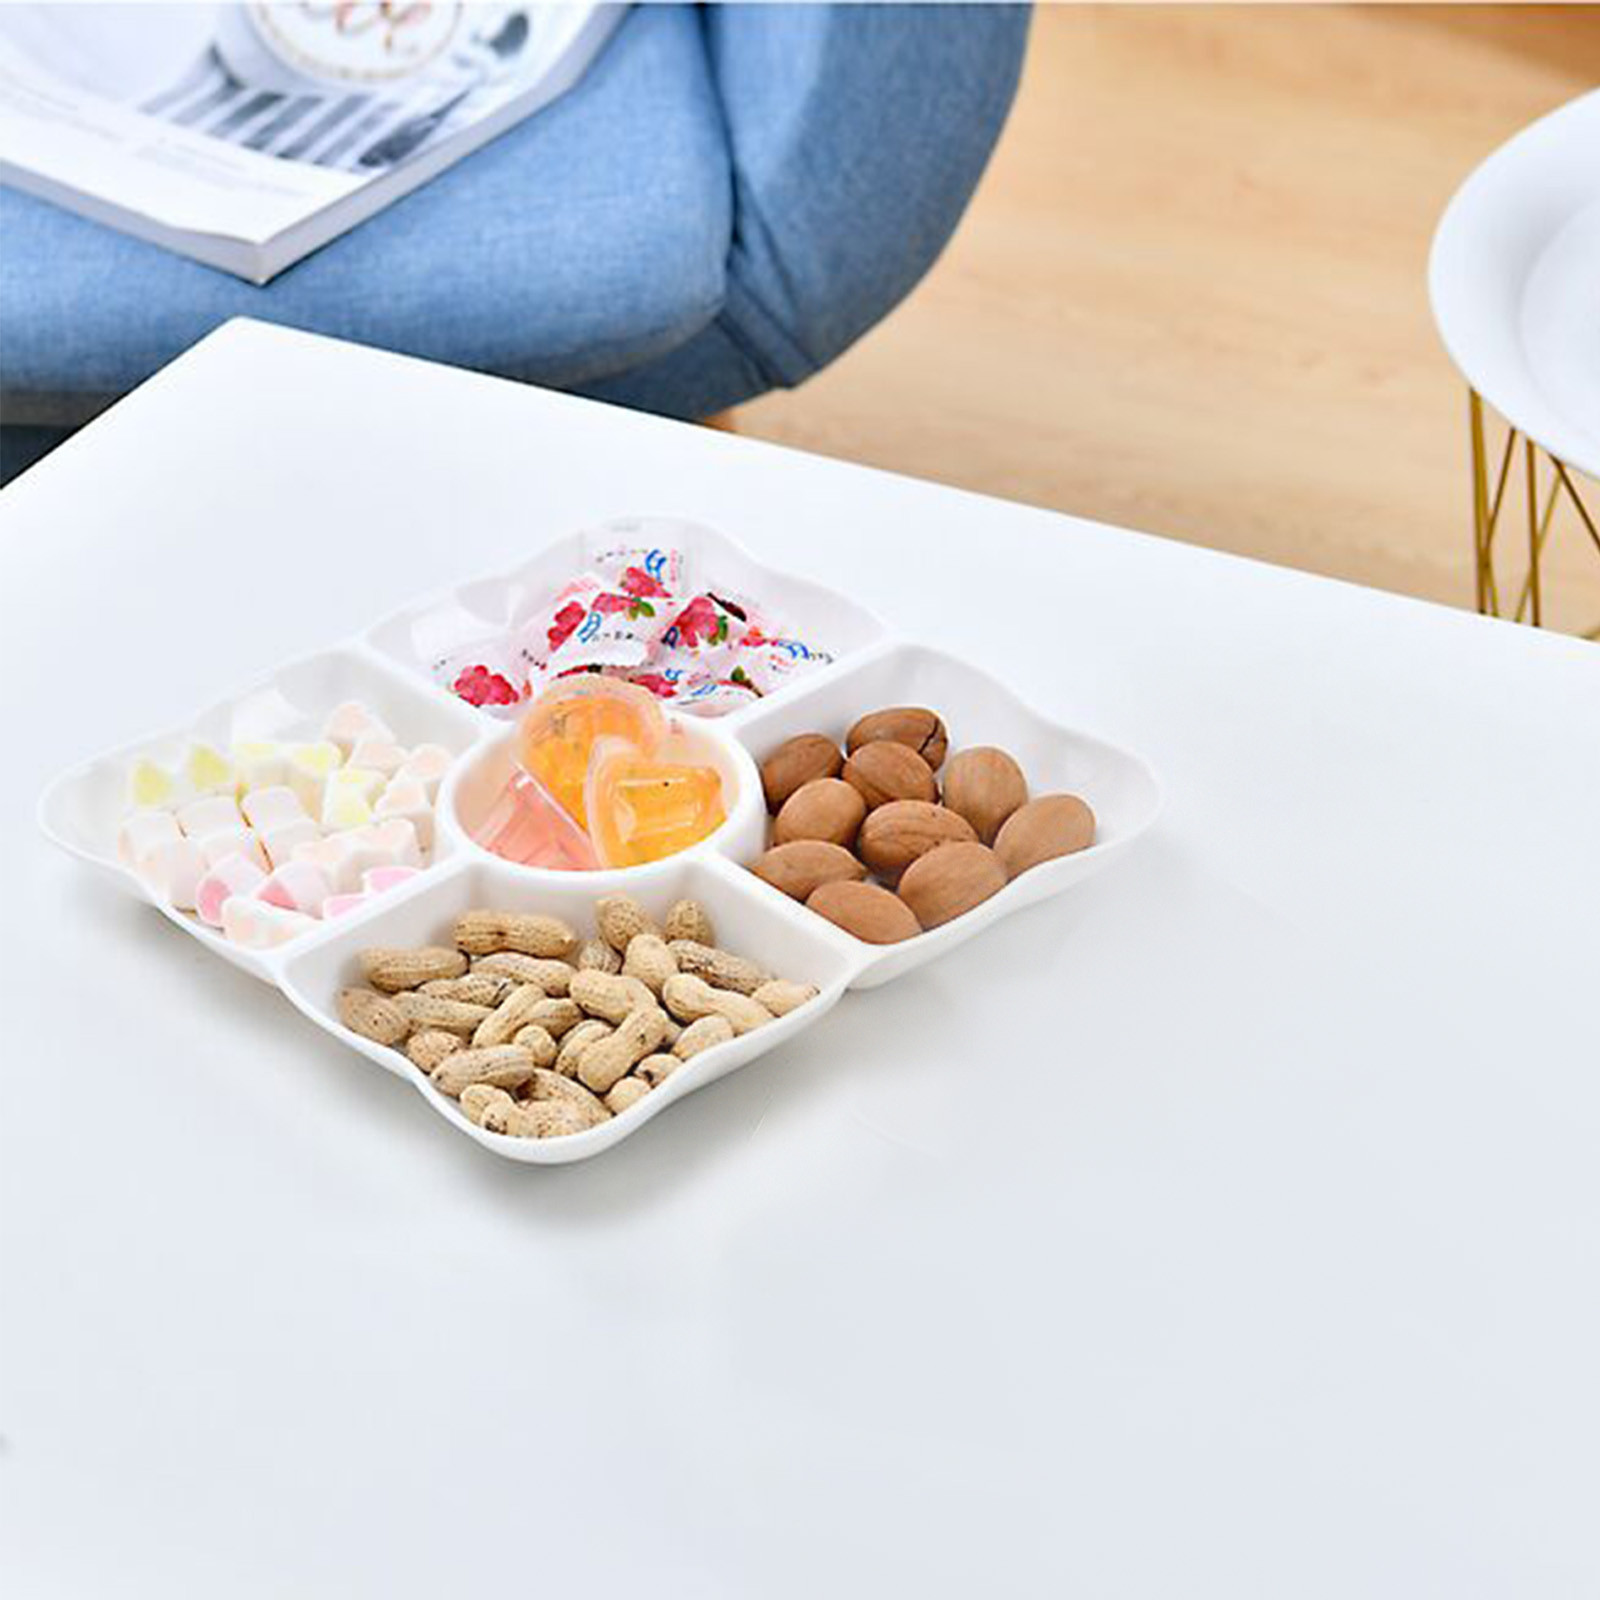 Matoen Divided Serving Dish, Appetizer Snack Tray Platter for Fruit, Veggies, Candy, Chip and Dip, Relish Tray for Christmas Thanksgiving Party, 5 Compartment, White - image 5 of 6